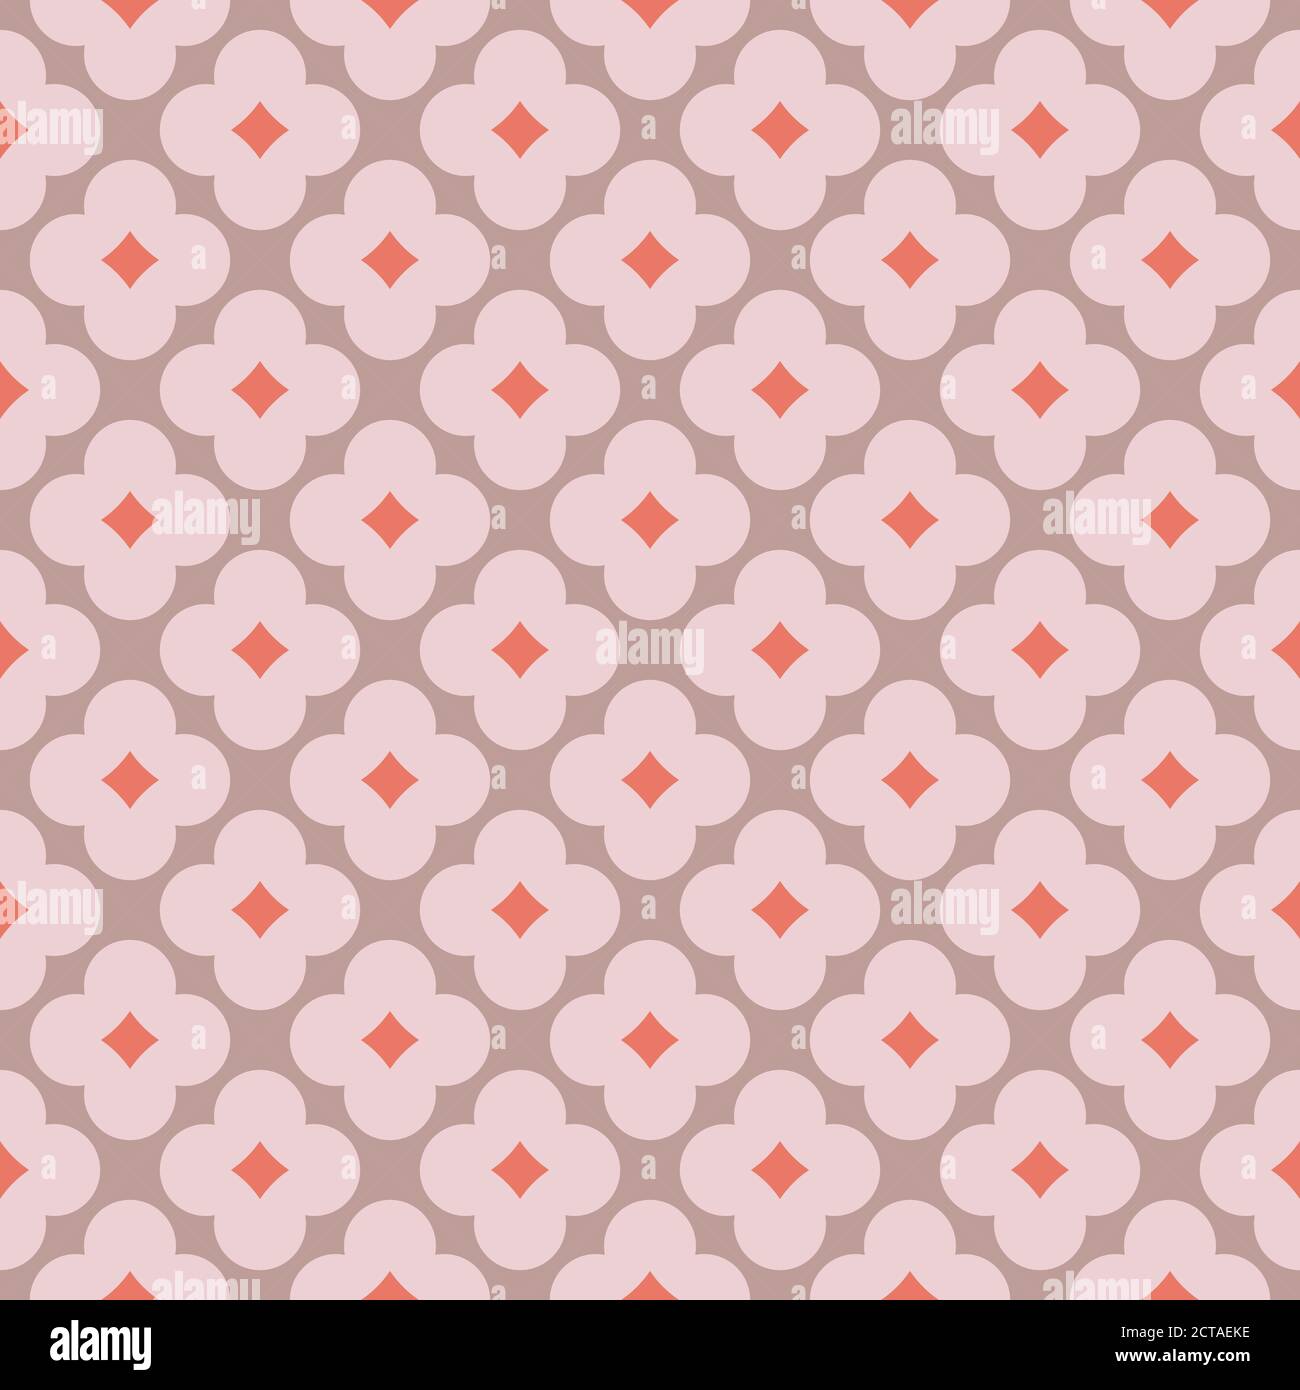 Seamless geometric pattern, simple elegant classic fashion design in red, pale taupe and pink colors. Vector illustration. Design for wallpaper, textile, fabric, wrapping paper. Stock Vector